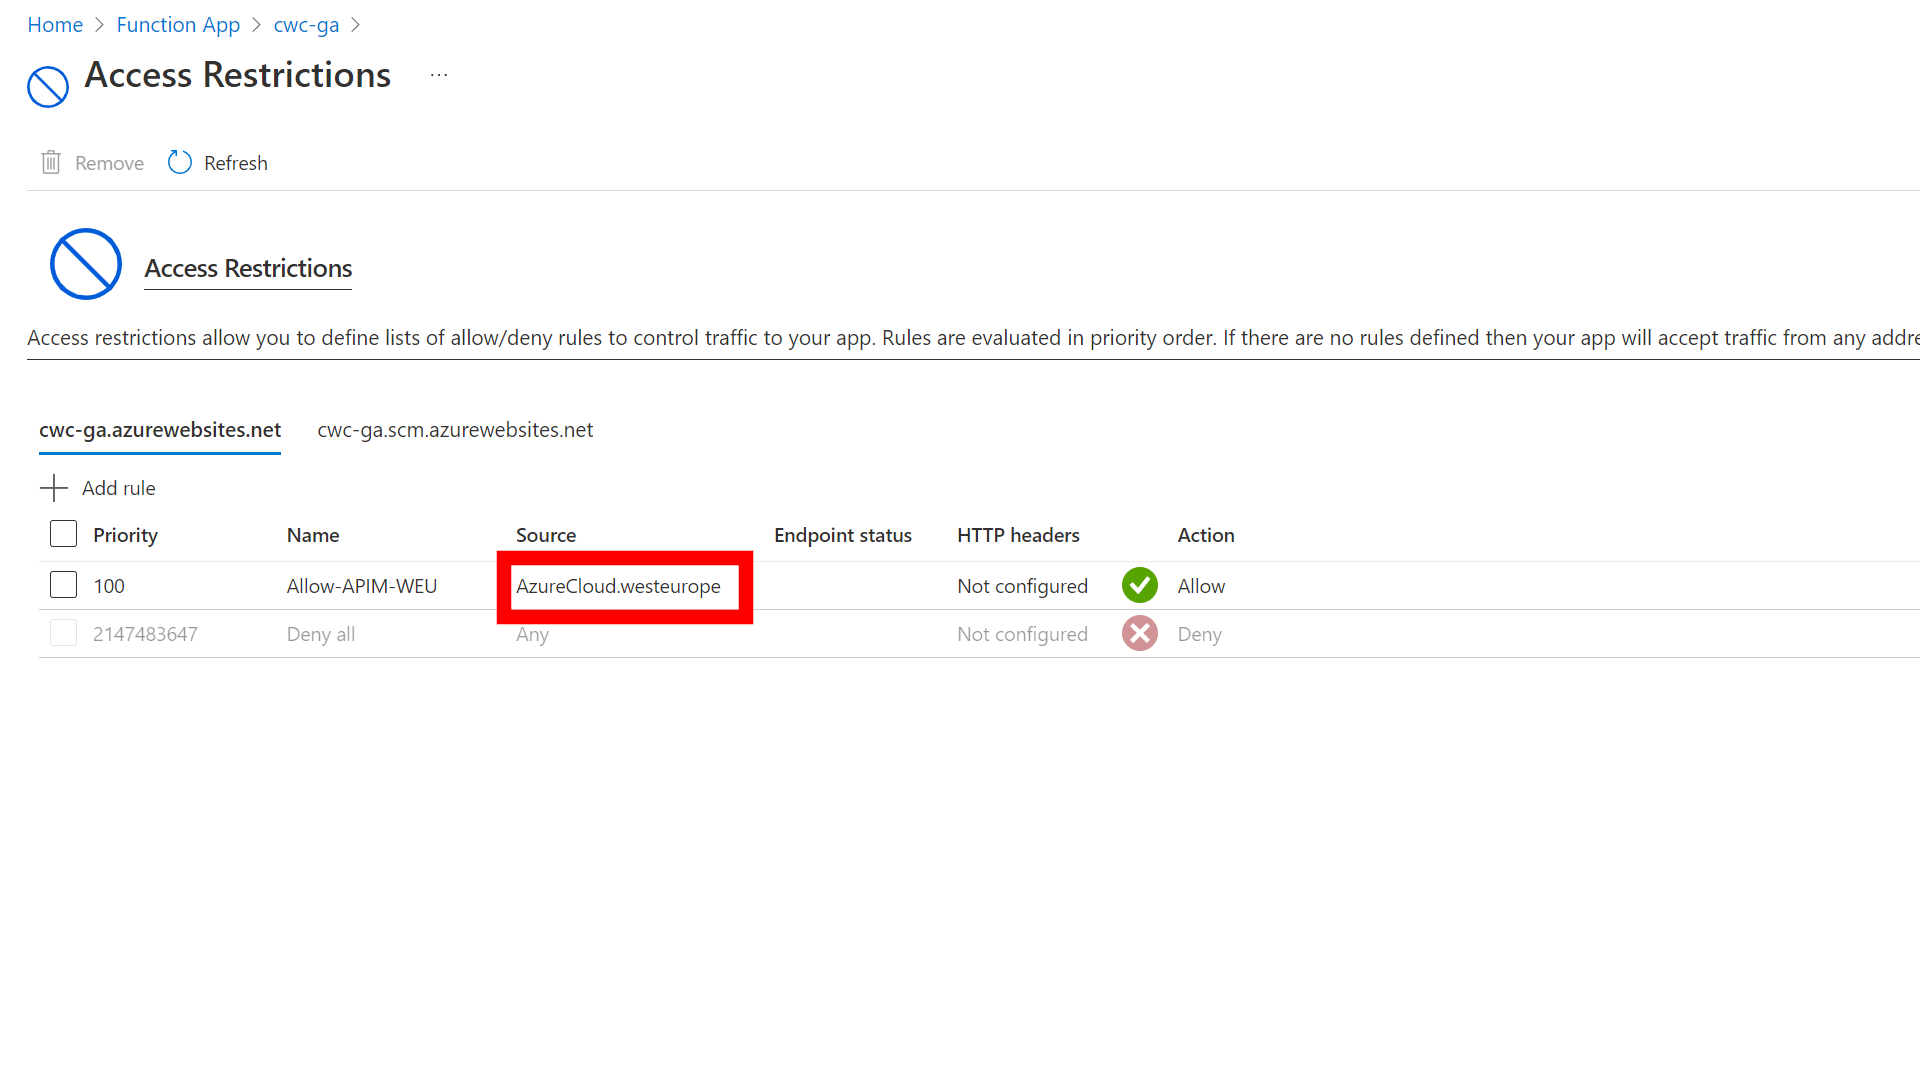 Screenshot showing an Access Restriction configured with an allow rule for the AzureCloud.westeurope Service Tag.